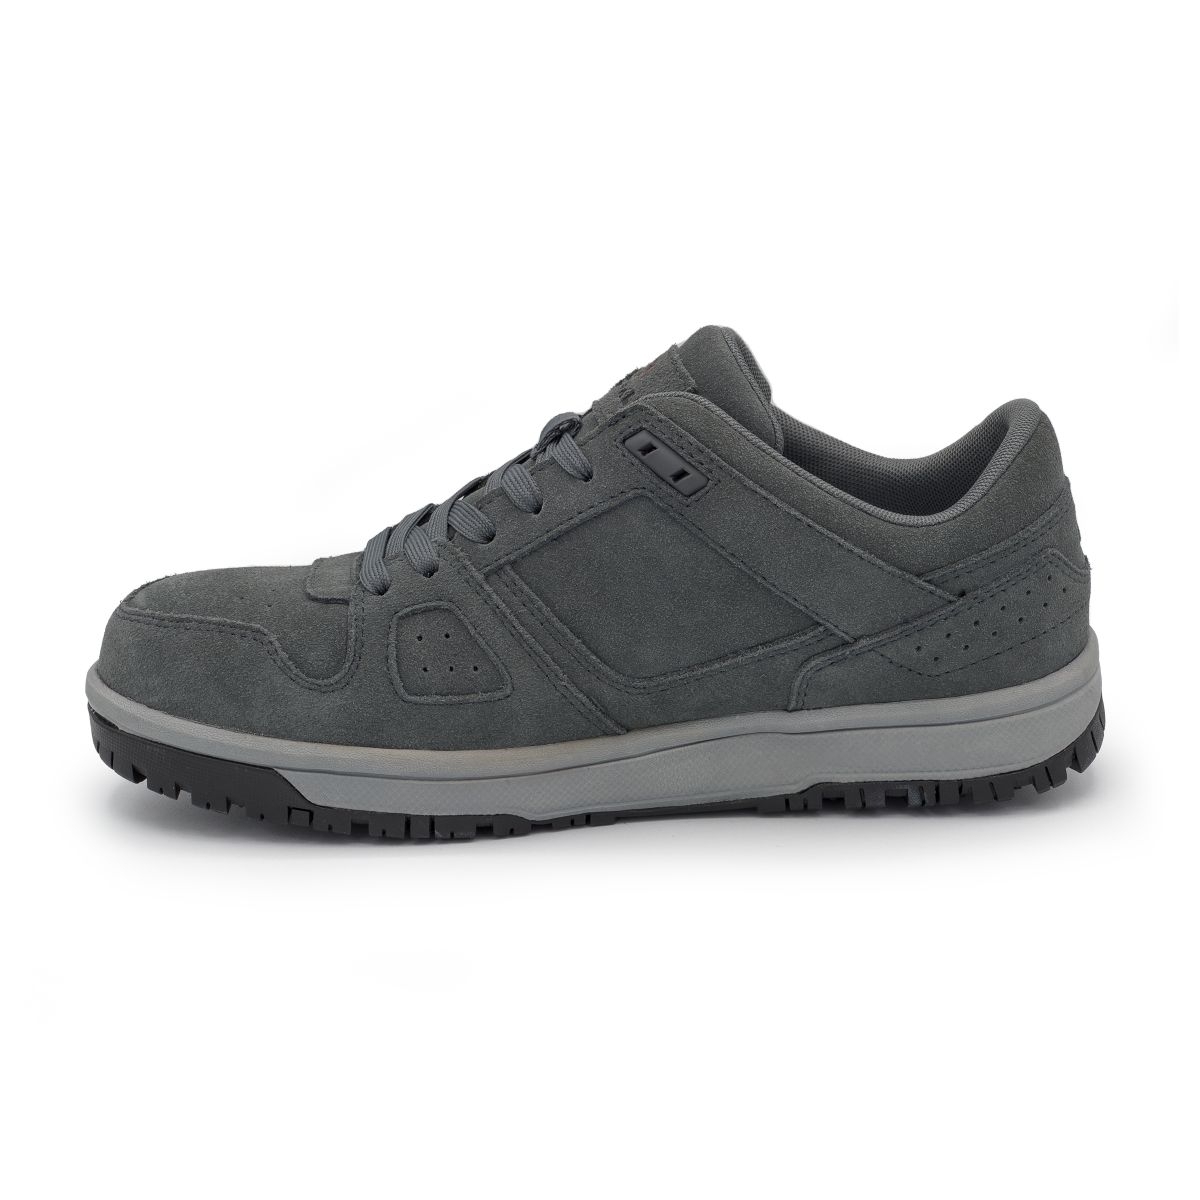 AIRWALK SAFETY Men's Mongo Composite Toe EH Work Shoe Charcoal/Grey - AW6301 CHARCOAL/GRAY - CHARCOAL/GRAY, 9.5-W